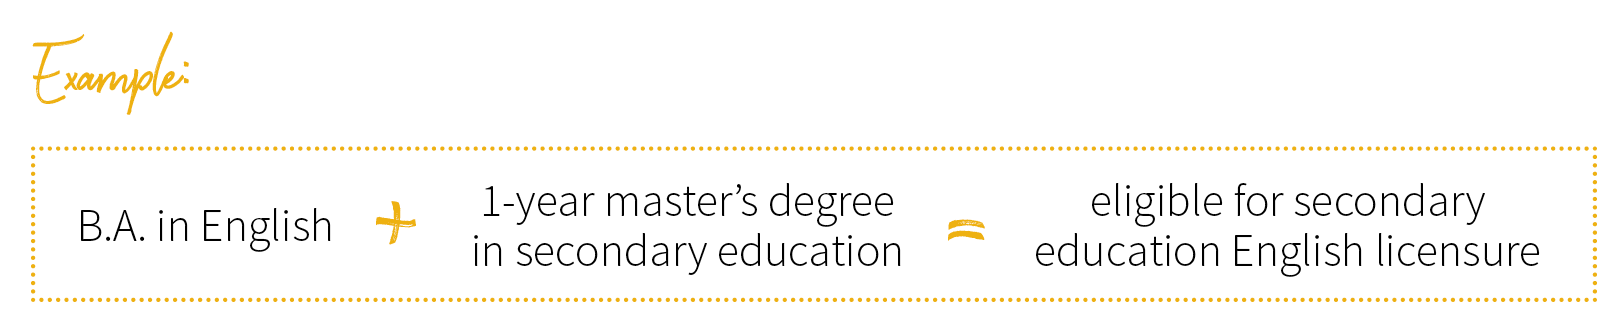 Example: B.A. in English + 1-year master's degree in secondary education = eligible for secondary education English licensure